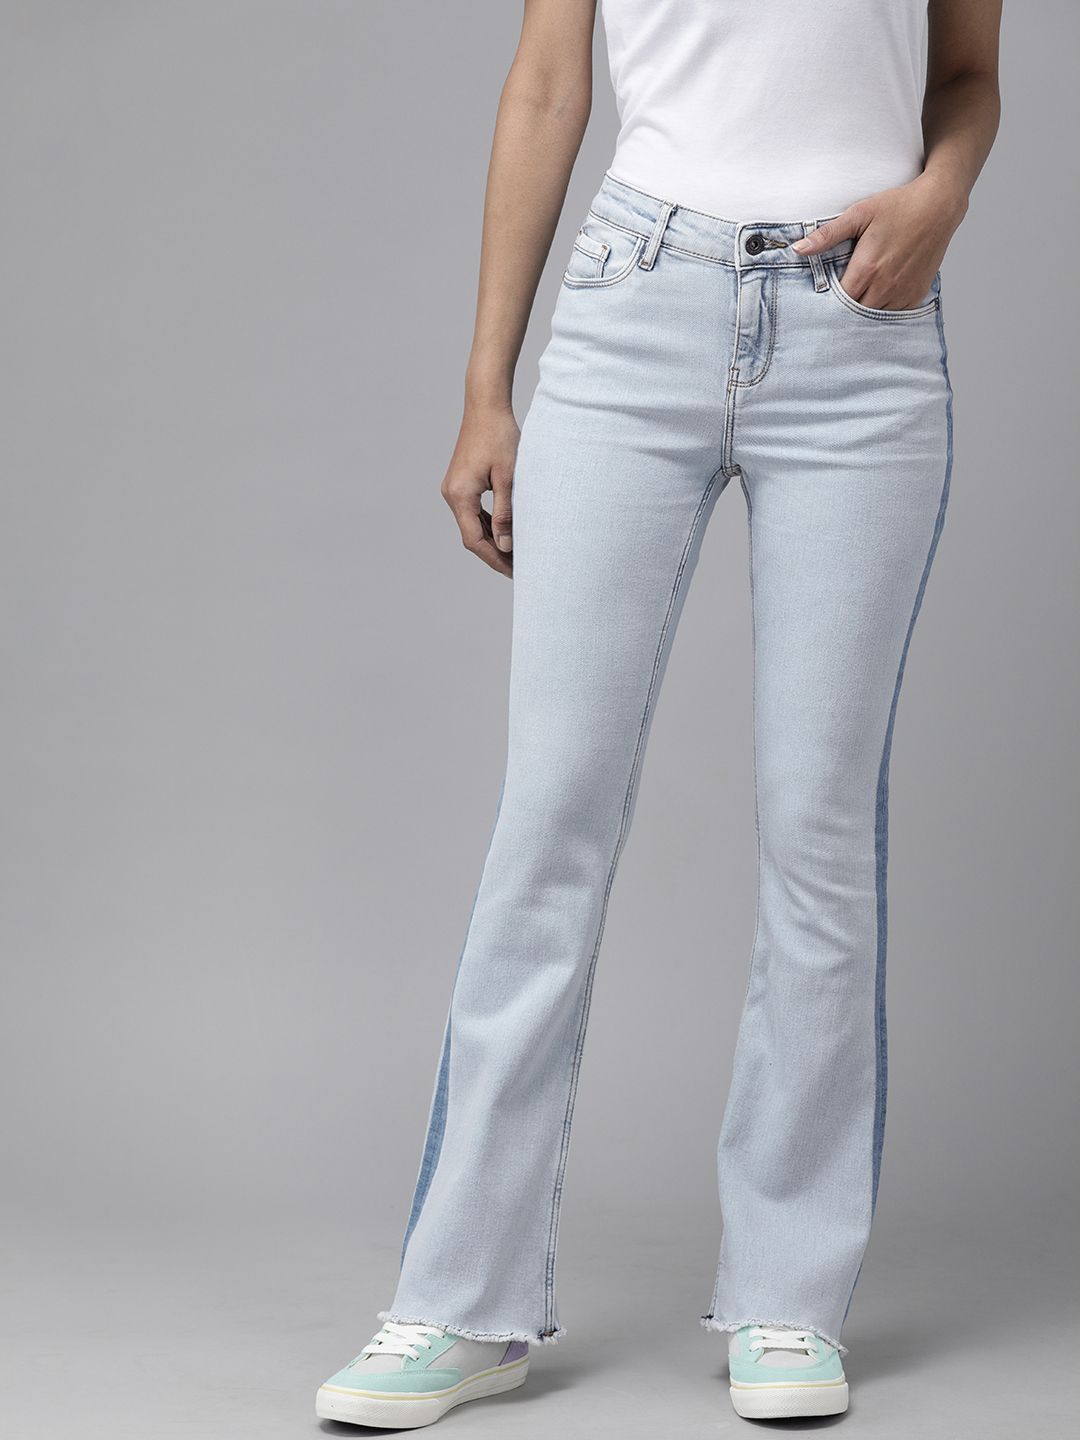 Vero Moda Women Blue Bootcut Clean Look No Fade Stretchable Jeans With Side Stripe Price in India